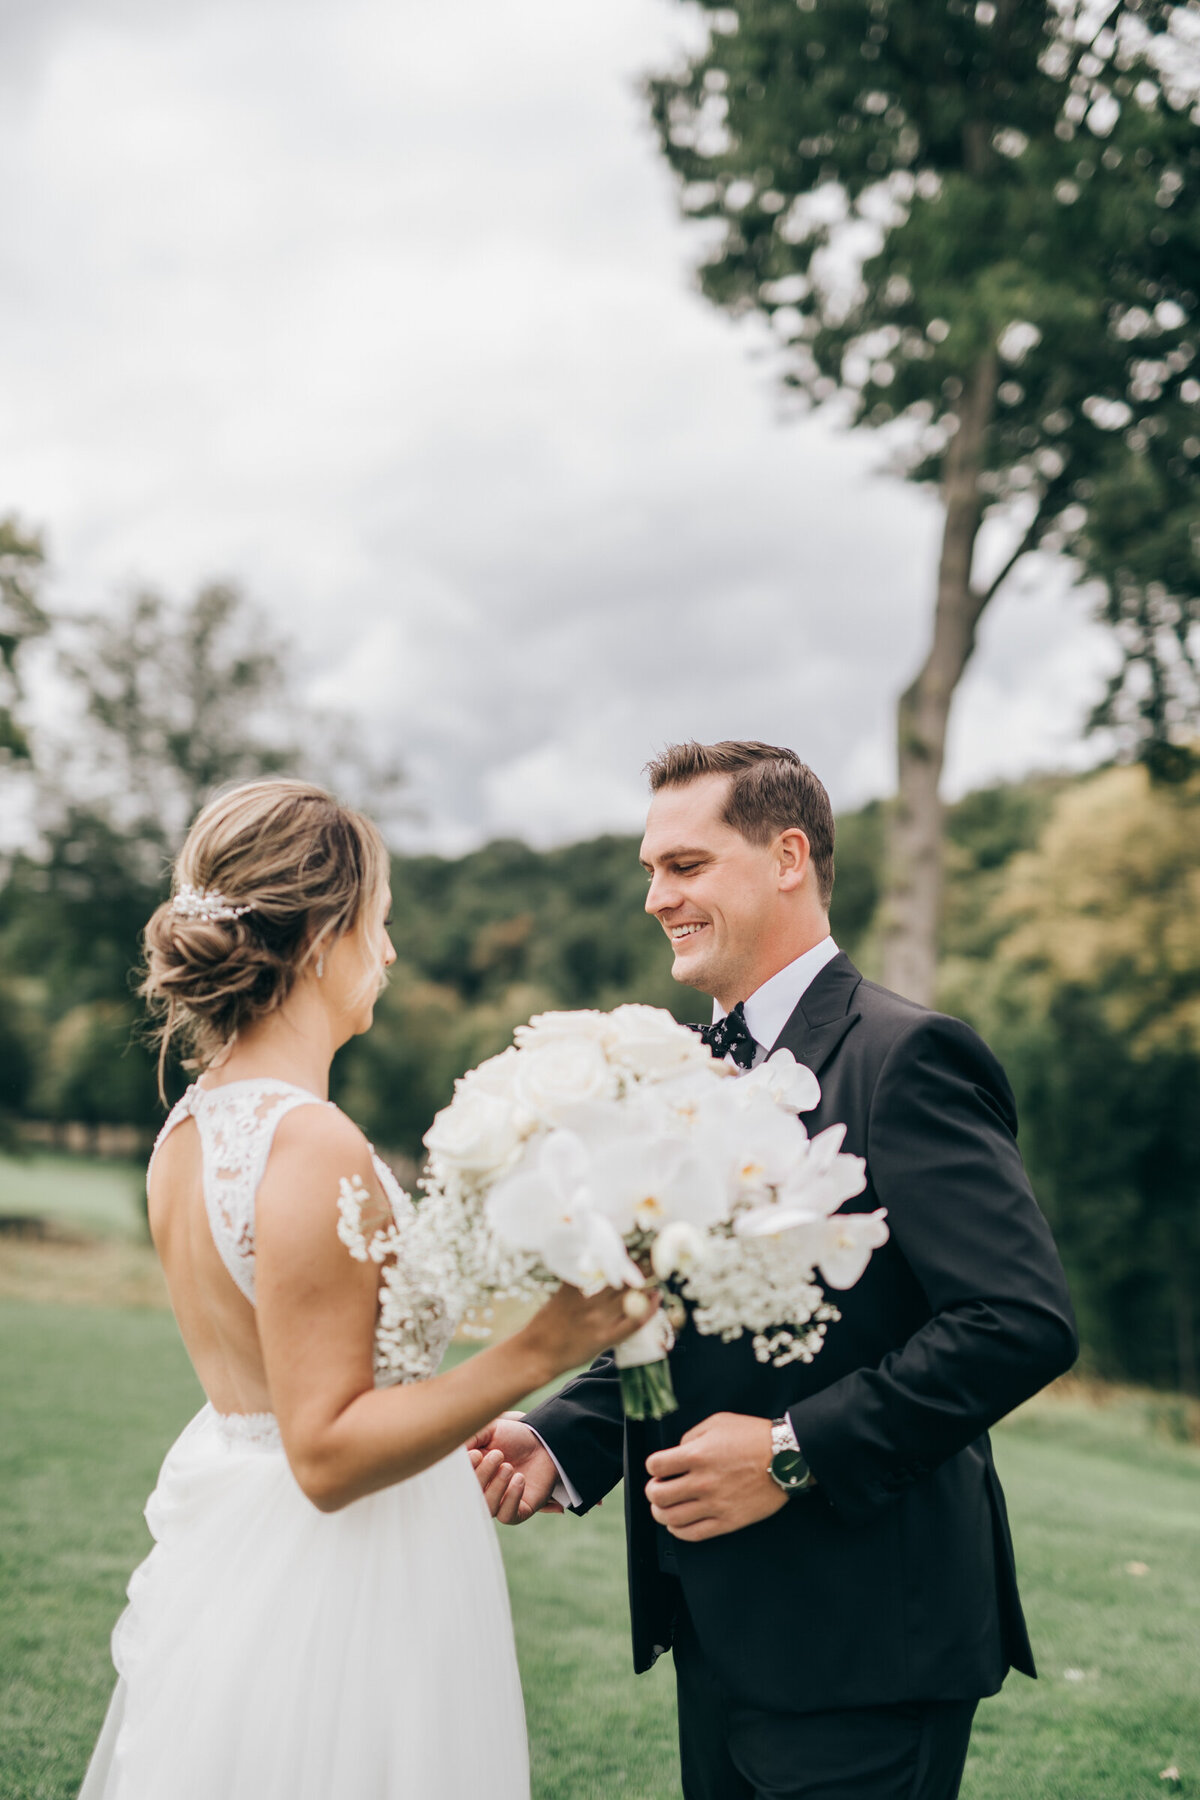 A groom's reaction to his bride during their romantic first look